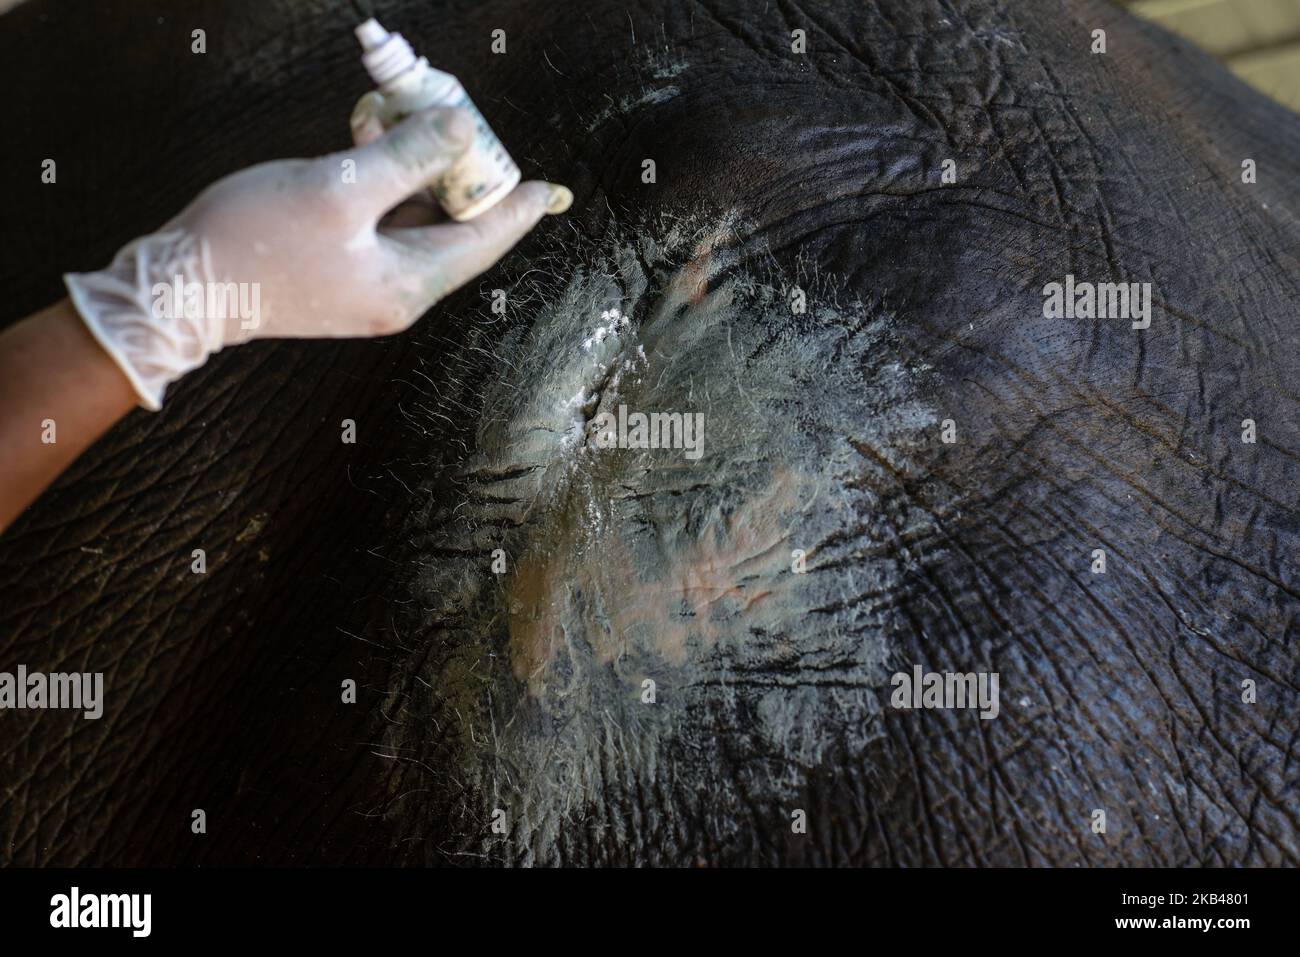 An elephant receives treatment at the hospital in the Elephant Conservation Center, Sayaboury, Laos, in December 2018. Laos was known as ‘The land of a million elephants’ in the past, today the elephant population in the country stands at around 800 individuals. Half of them is made up of captive elephants, and their number is in decline; the owners are not interested in breeding animals (the cow needs at least four years out of work during her pregnancy and lactation), illegal trafficking to China and other neighboring countries continues. Against this backdrop, the Elephant Conservation Cent Stock Photo